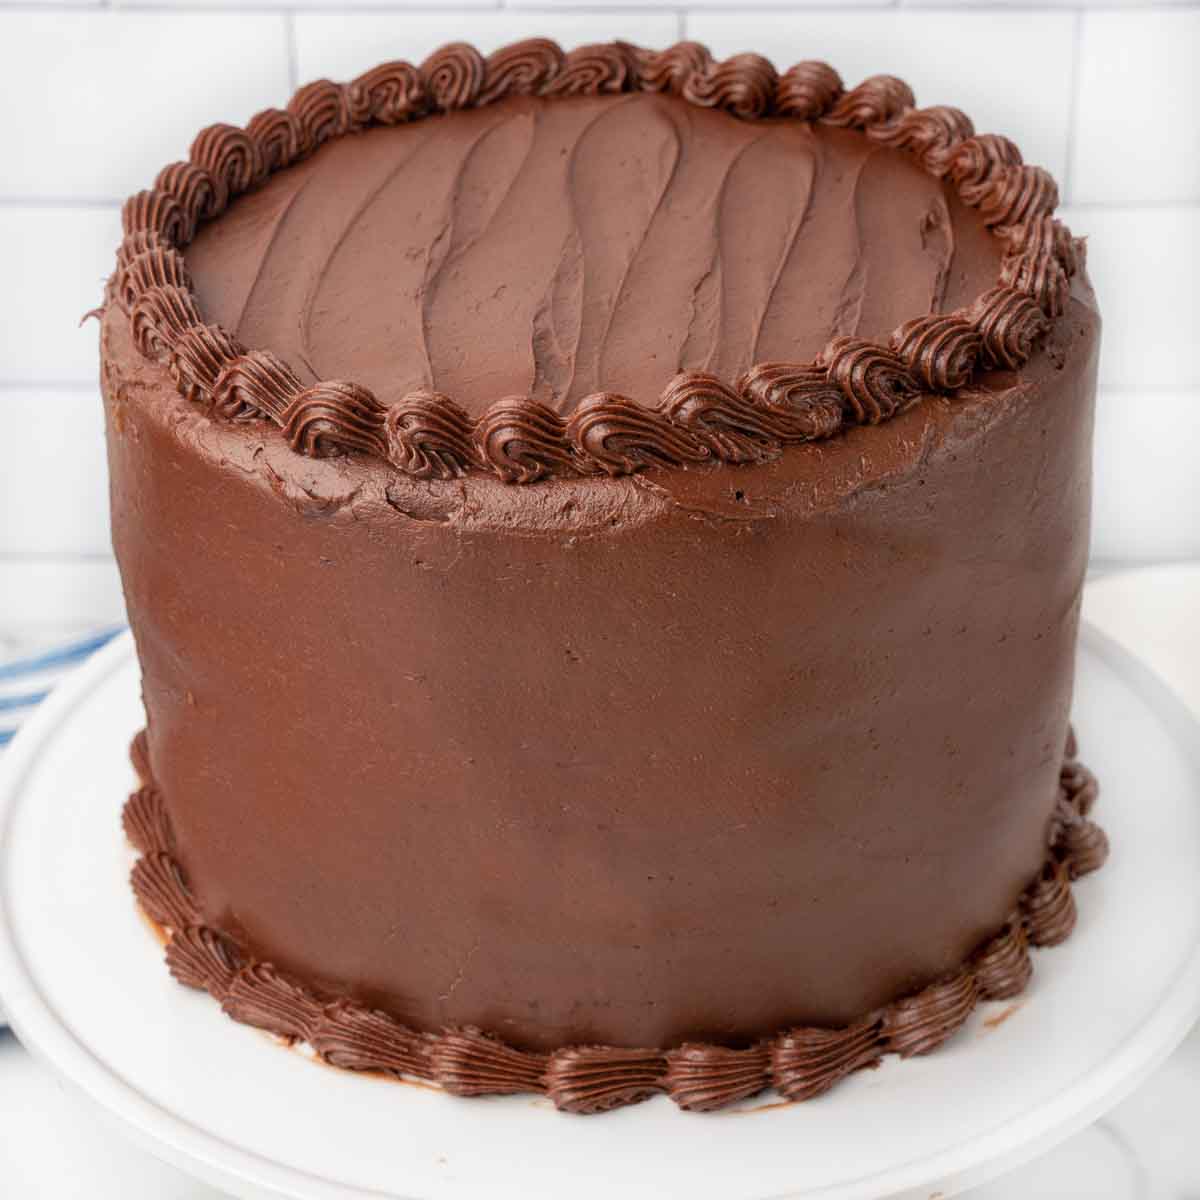 Whole chocolate cake frosted and decorated with chocolate cream cheese frosting.